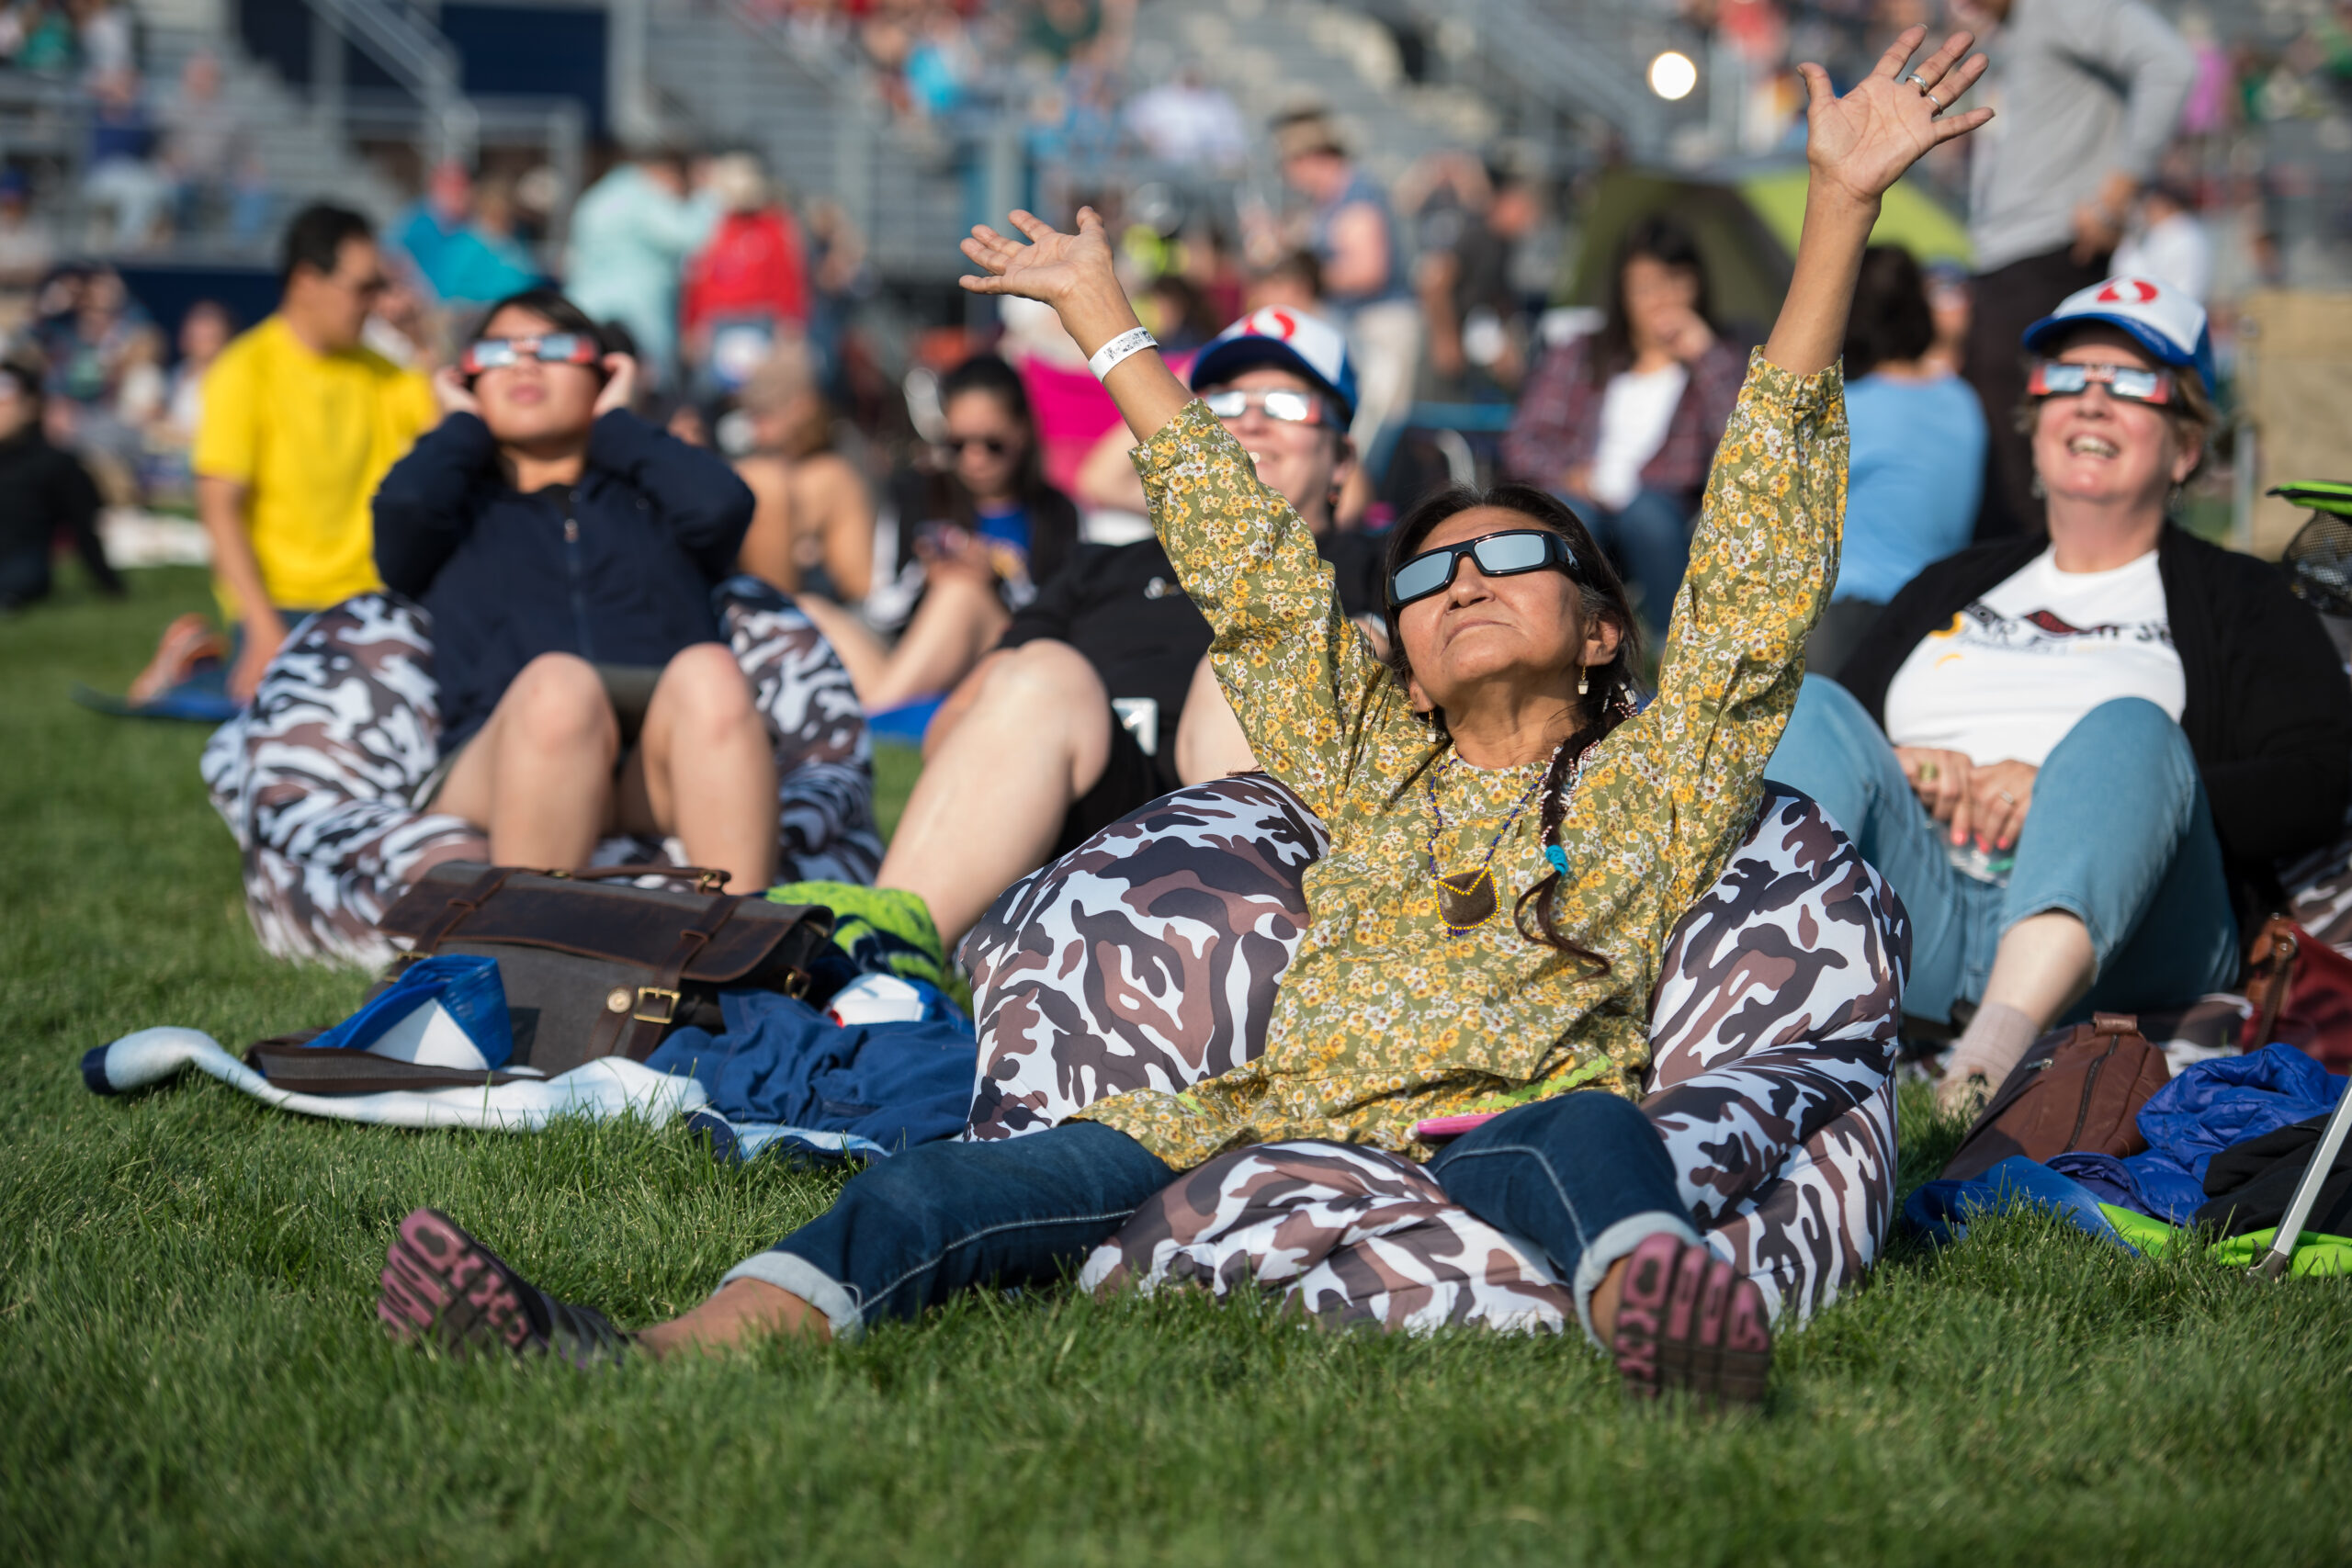 Eclipse observers sitting in grass